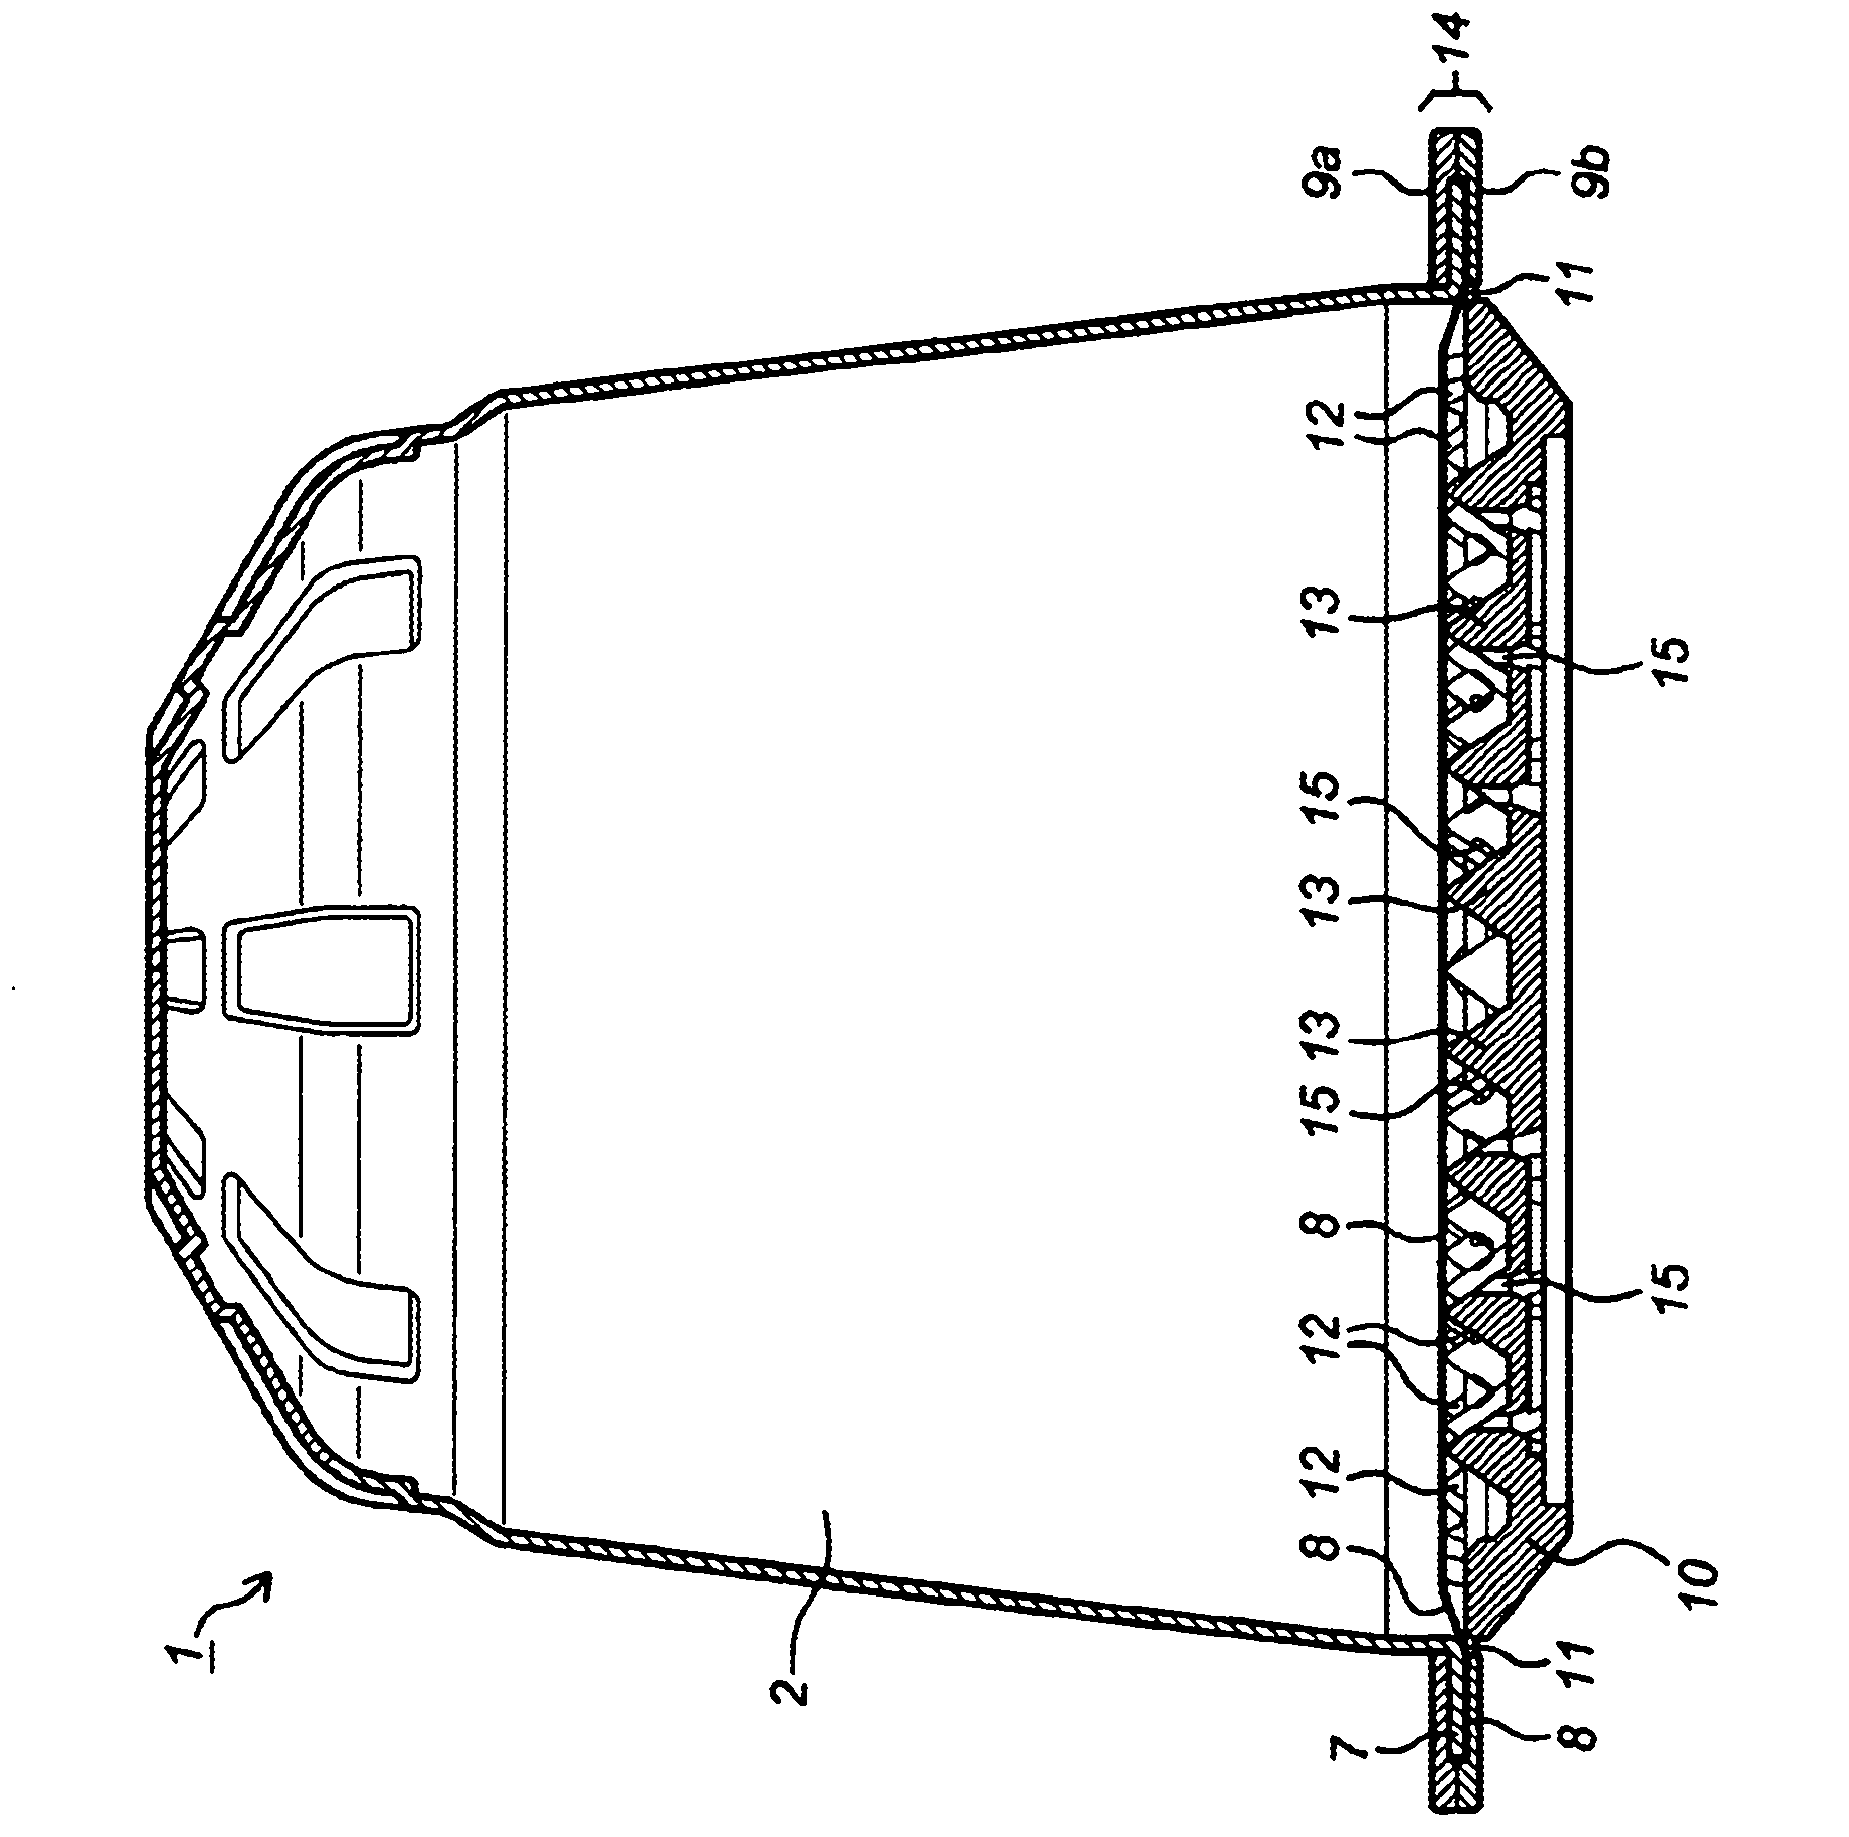 Capsule, device and method for preparing a beverage by extraction